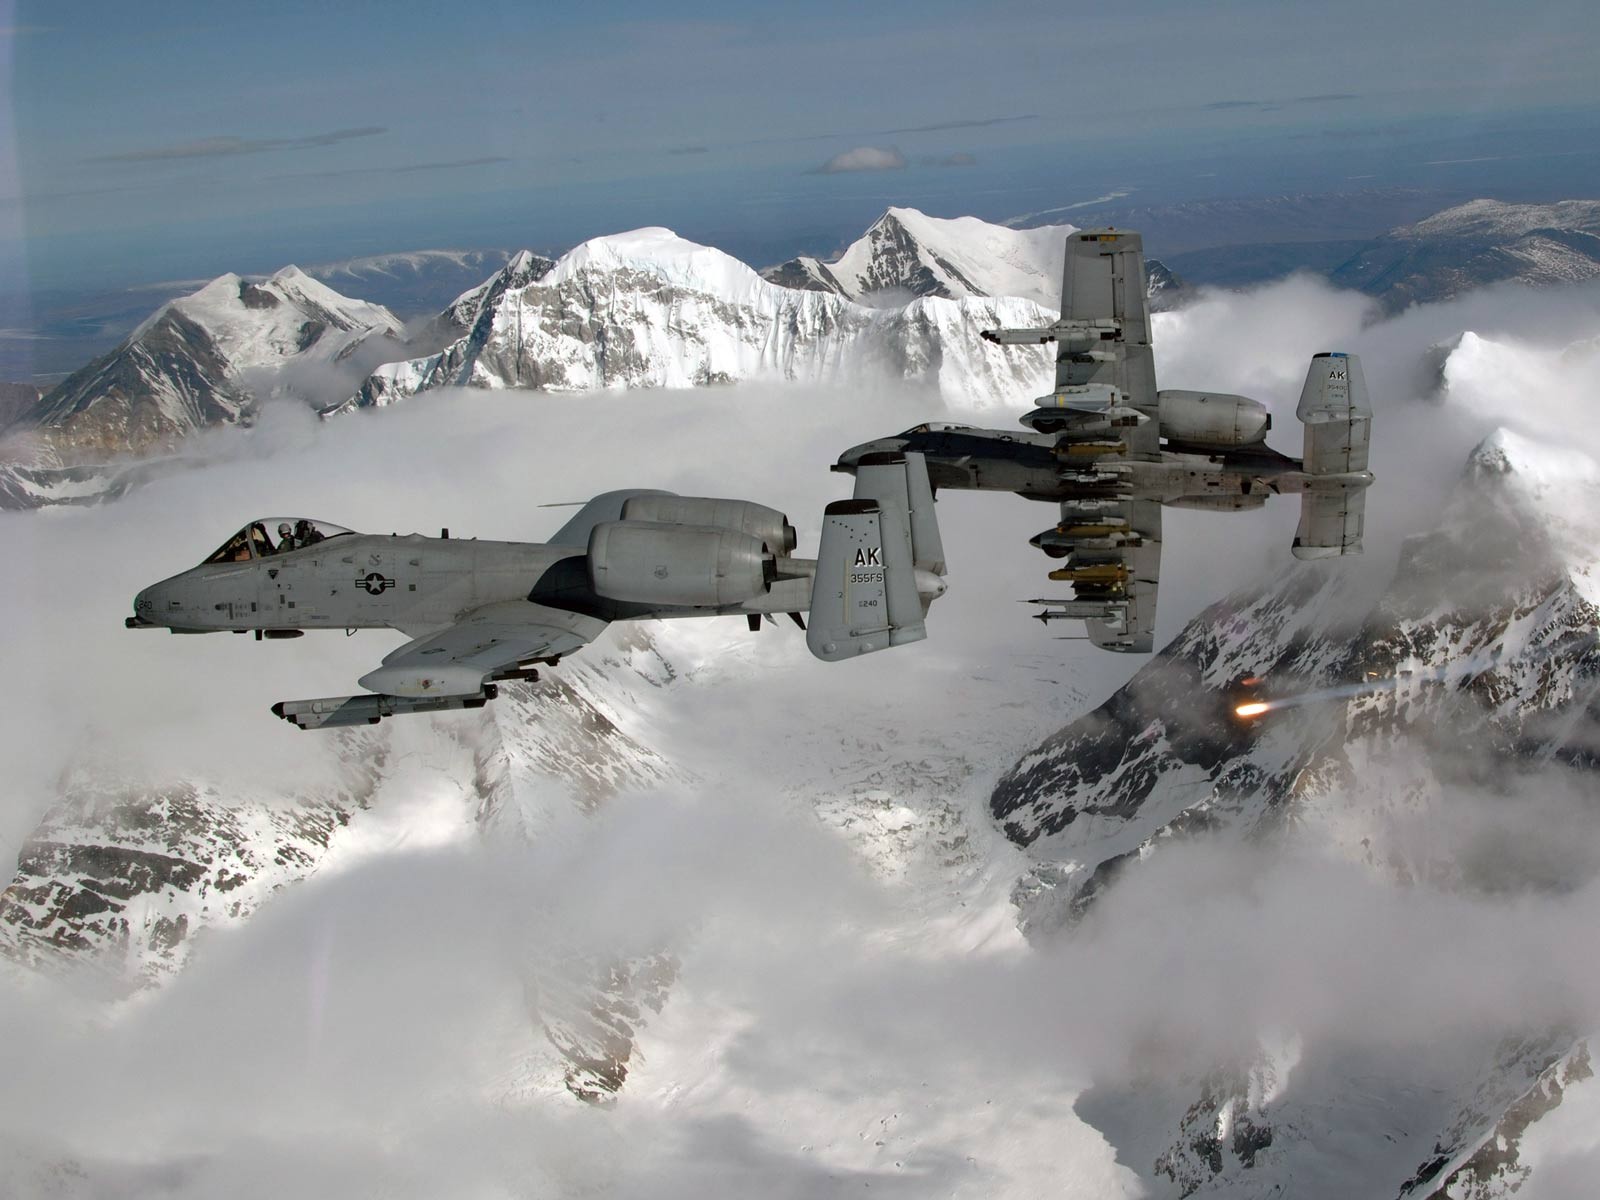 General 1600x1200 aircraft jets Fairchild Republic A-10 Thunderbolt II military military vehicle vehicle snowy peak mountains American aircraft